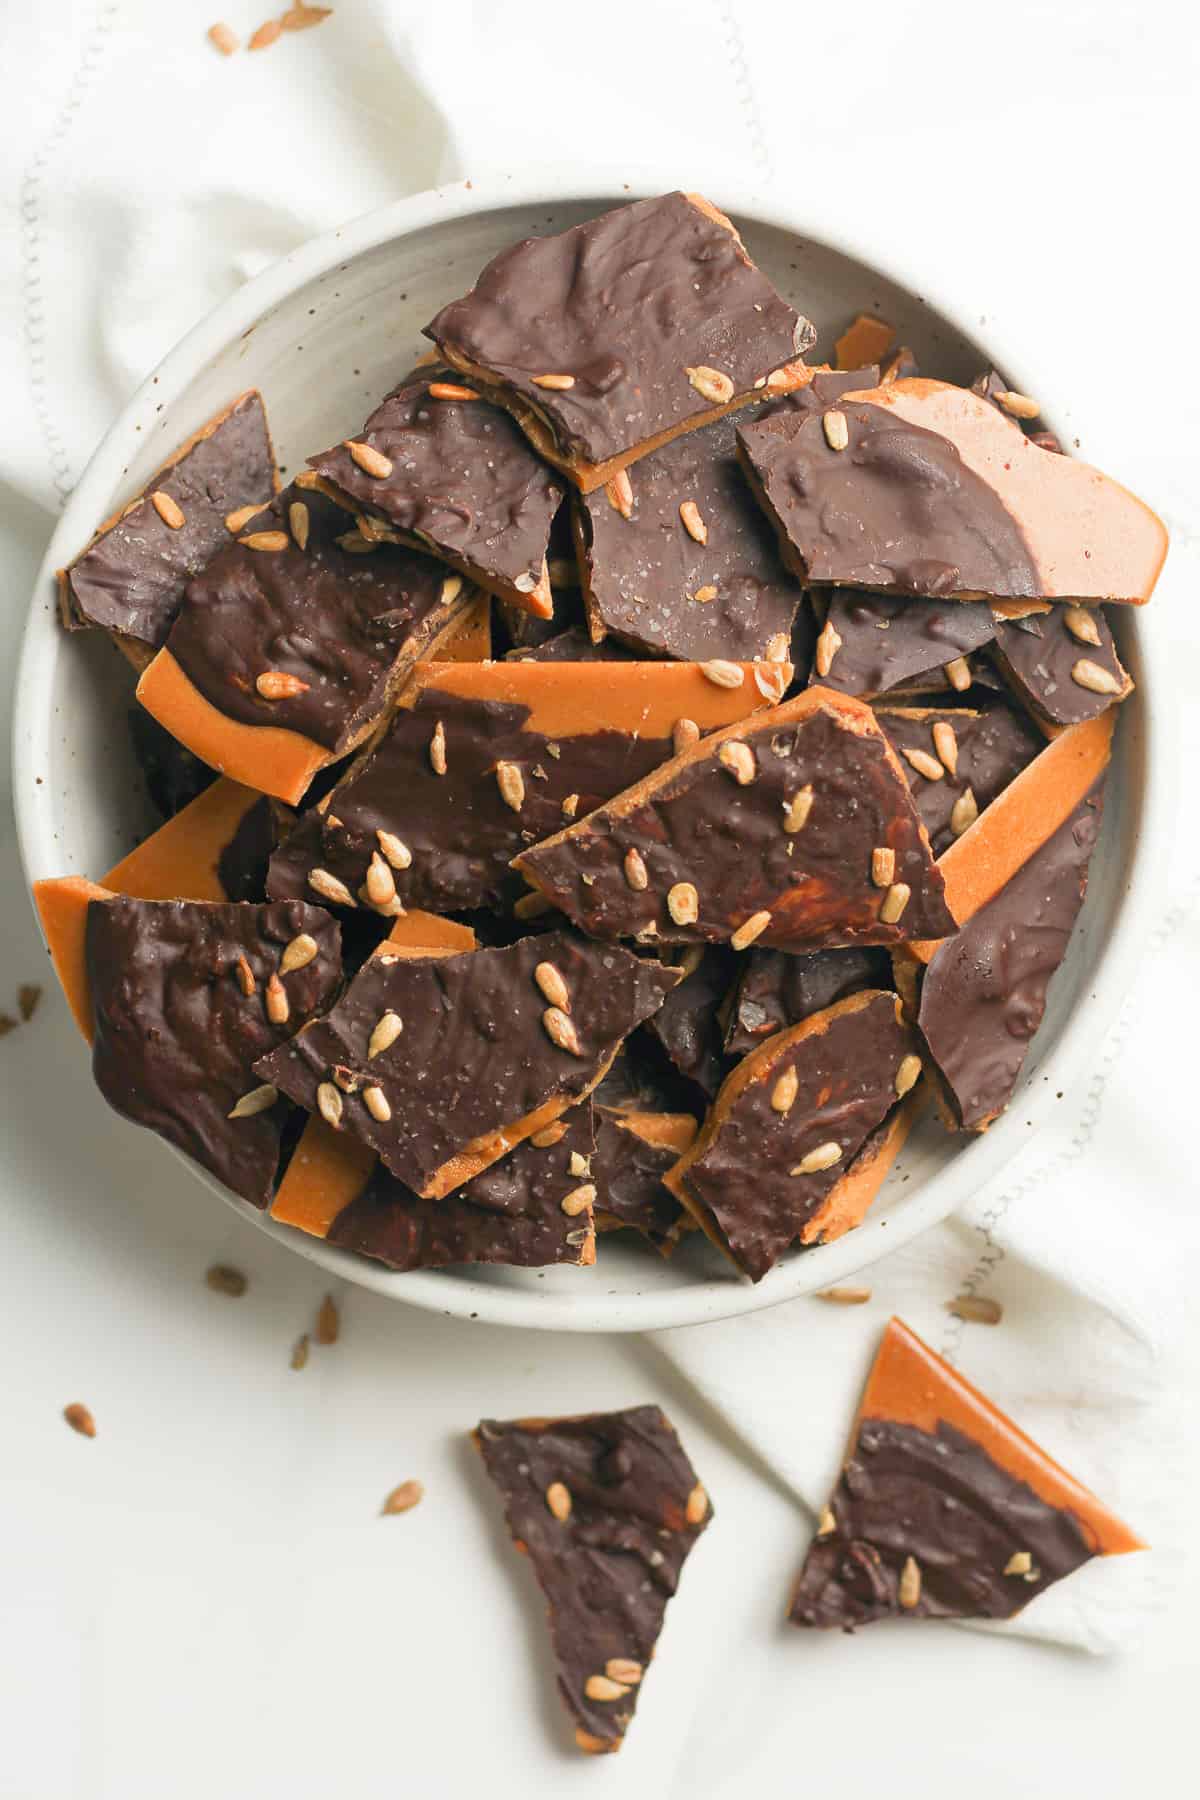 Overhead shot of a large bowl of dark chocolate toffee.